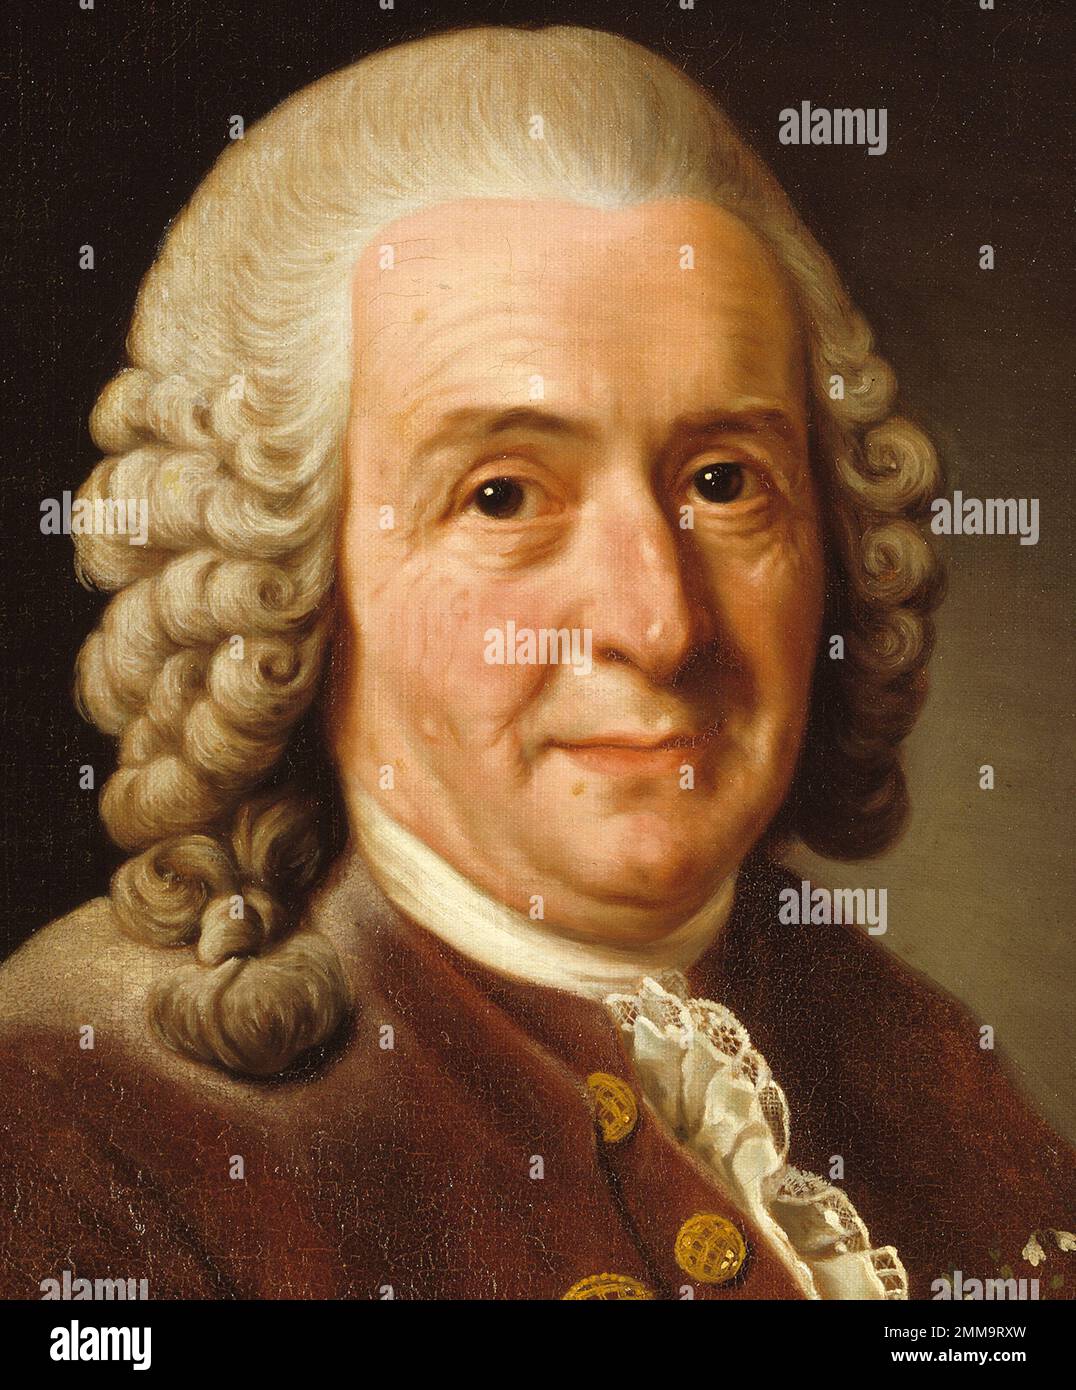 Carl Linnaeus (1707 – 1778), also known as Carl von Linné, Swedish botanist, zoologist, taxonomist, and physician who formalised binomial nomenclature, the modern system of naming organisms. He is known as the 'father of modern taxonomy'. Stock Photo